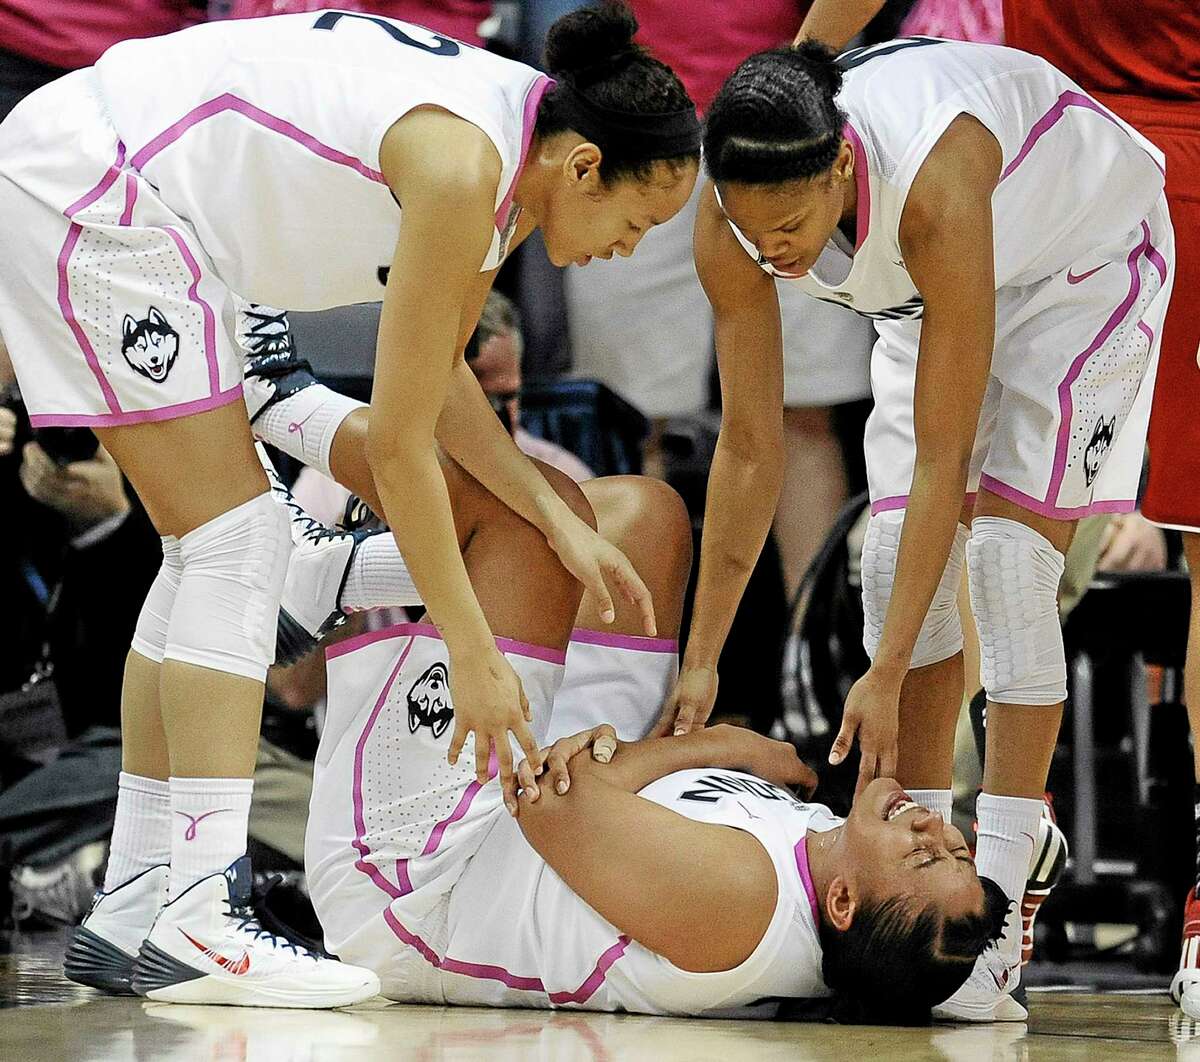 Losing Kaleena Mosqueda-Lewis, shown holding her arm after a hard fall to the court, to an illness is causing lineup changes for the UConn women’s basketball team.